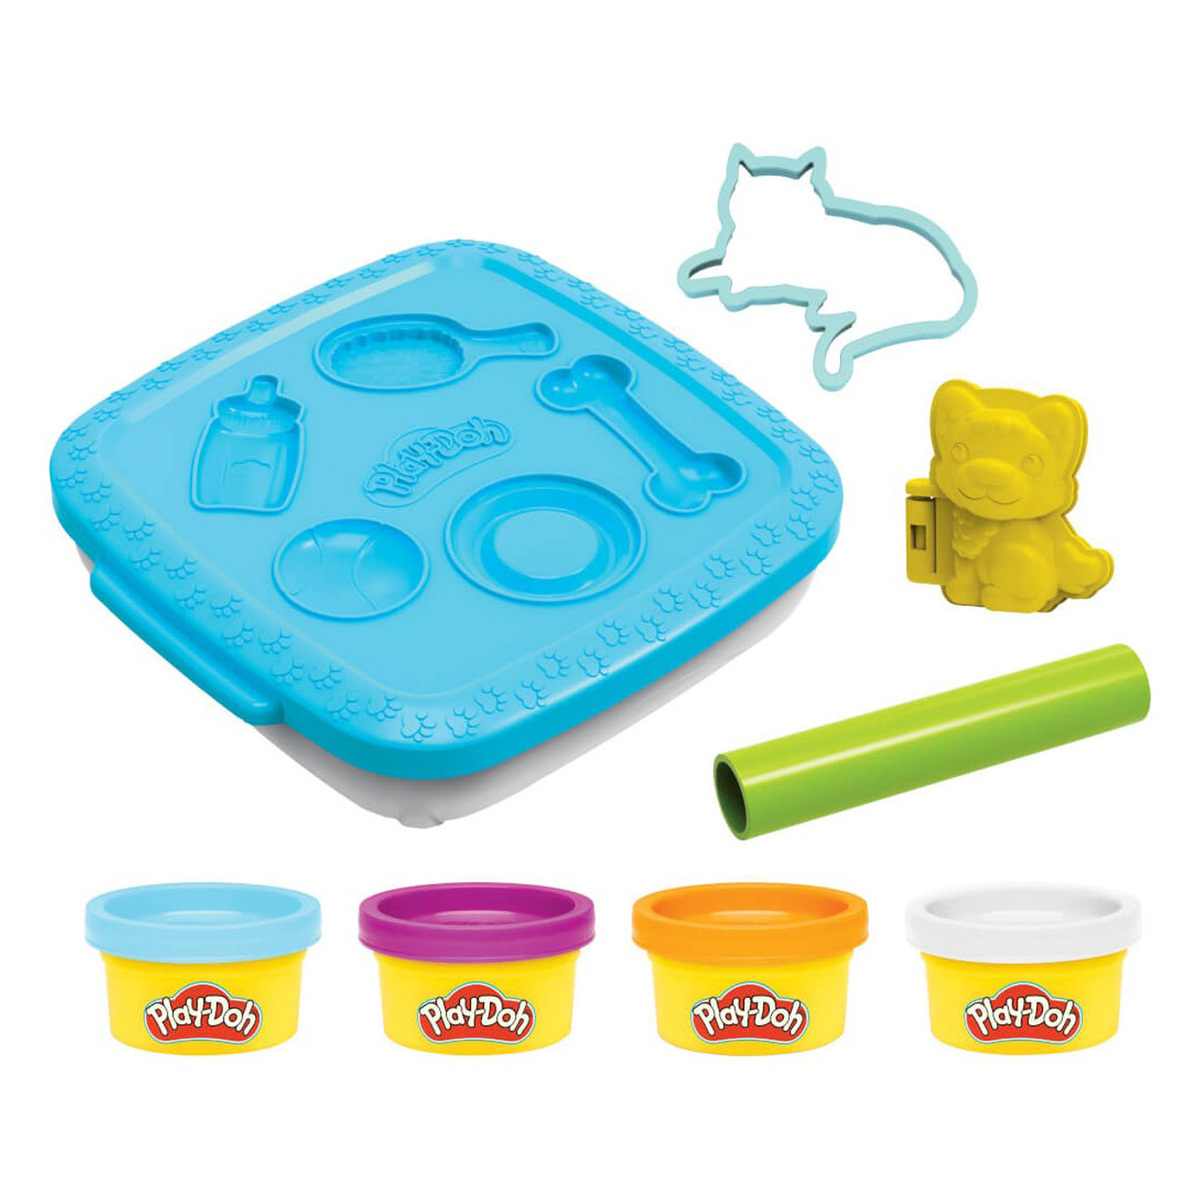 Playdoh Create & Go Pets Playset Art And Crafts Activity Toy for Kids, F6914